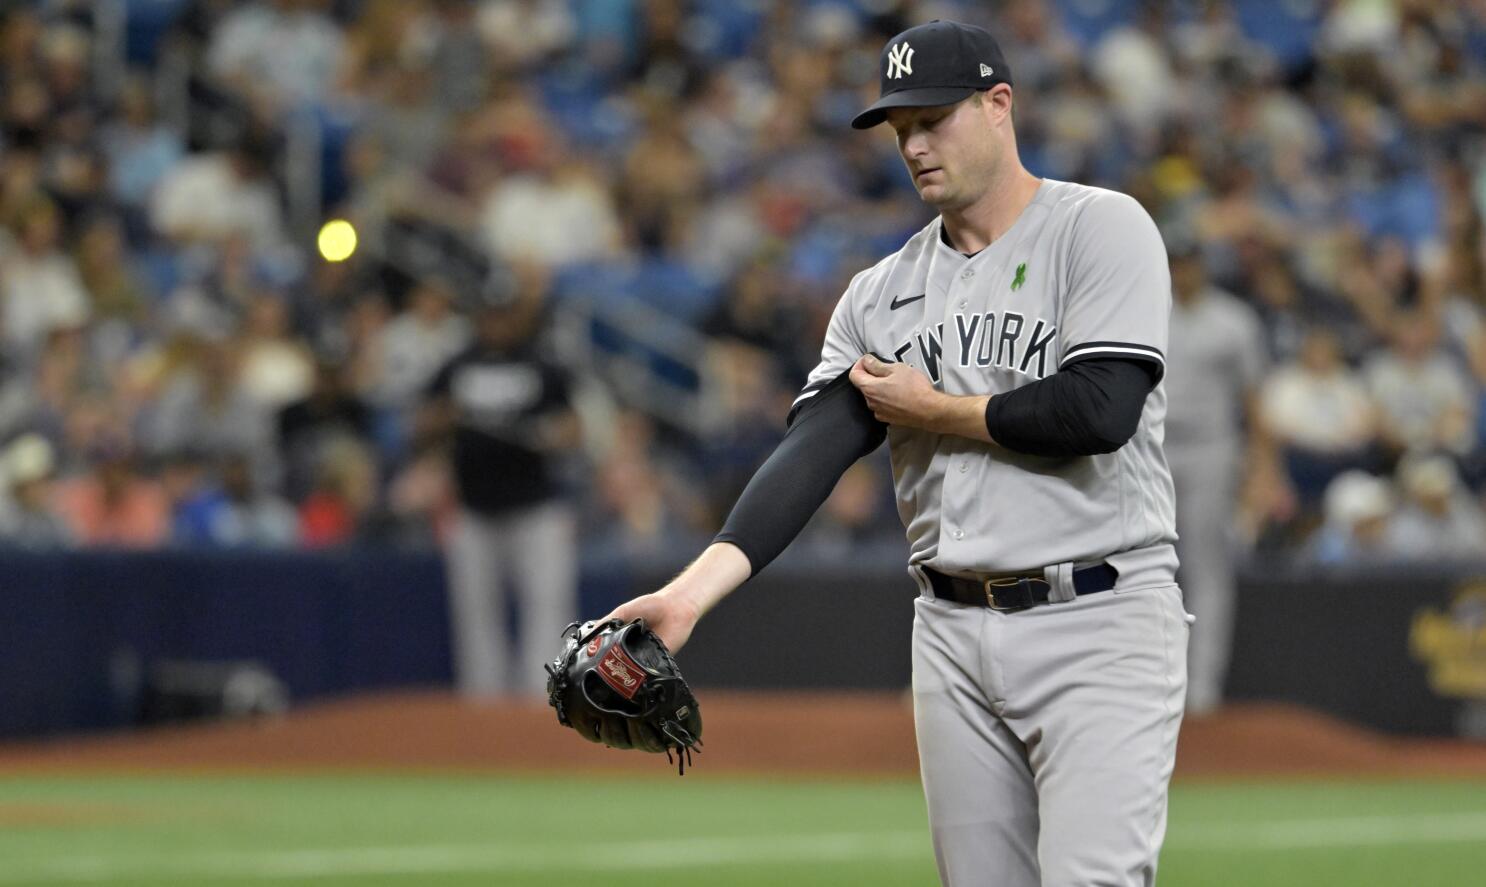 Cole wastes 6-run lead, Rays beat Yanks 8-7 in 10 innings - The